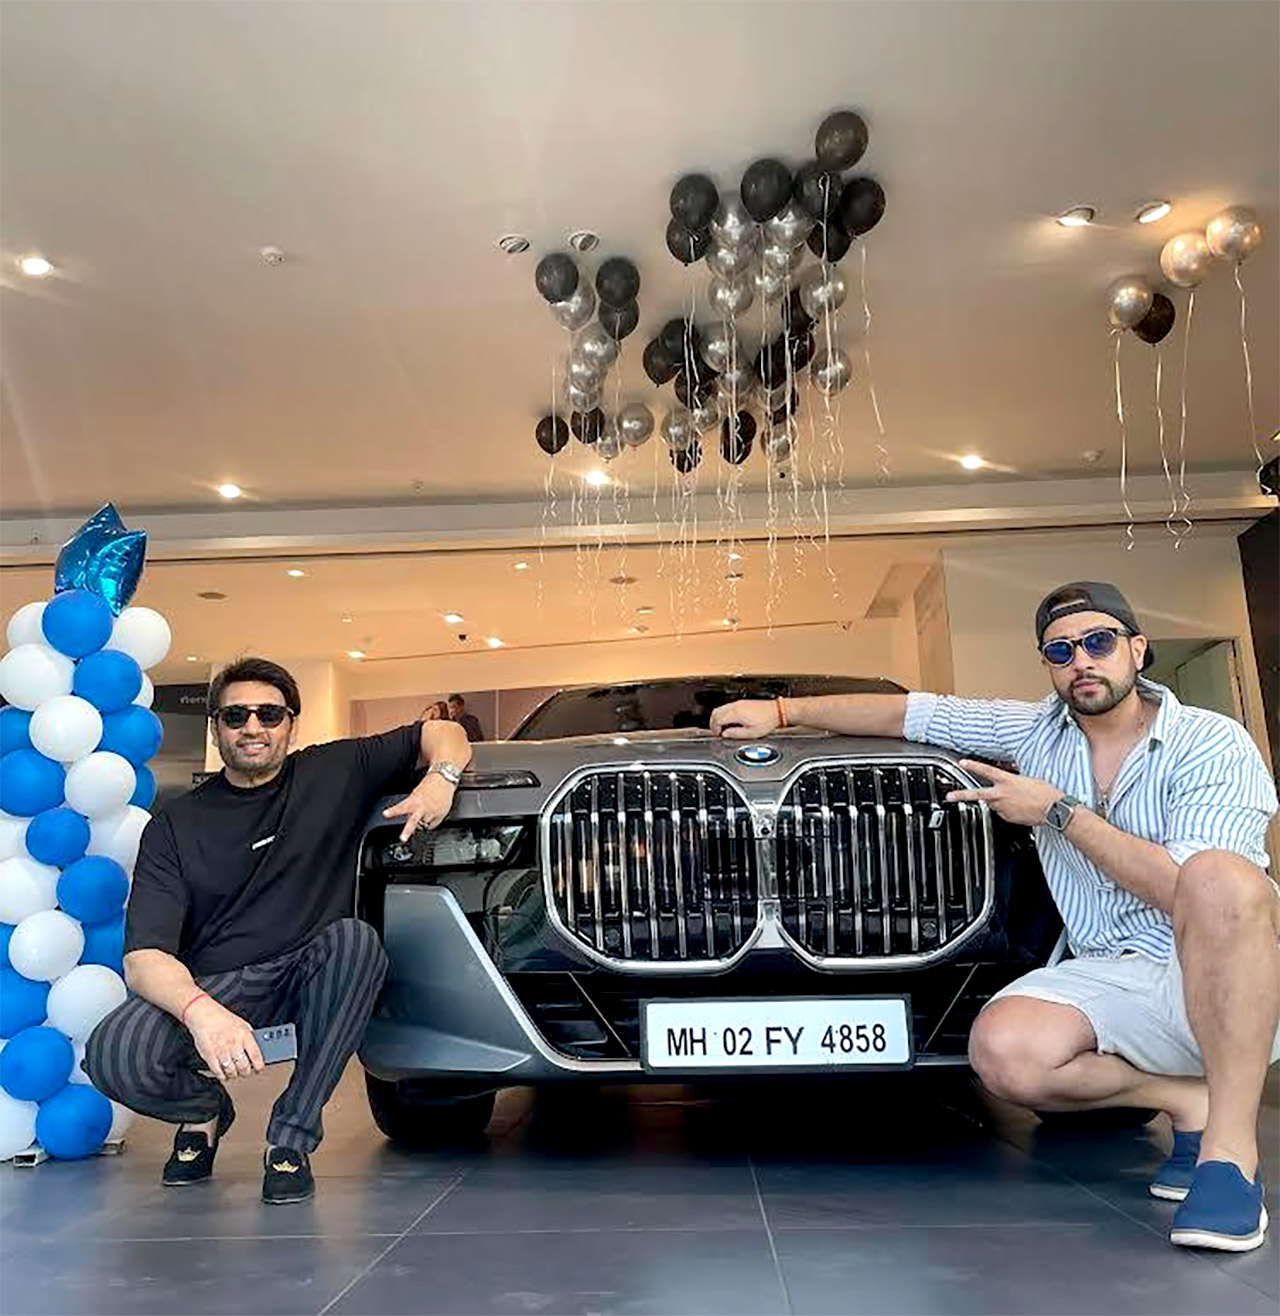 Shekhar Suman gifts wife a swanky BMWi7 worth Rs. 2.4 cr on their wedding anniversary; says, “My family should always have the best” : Bollywood News